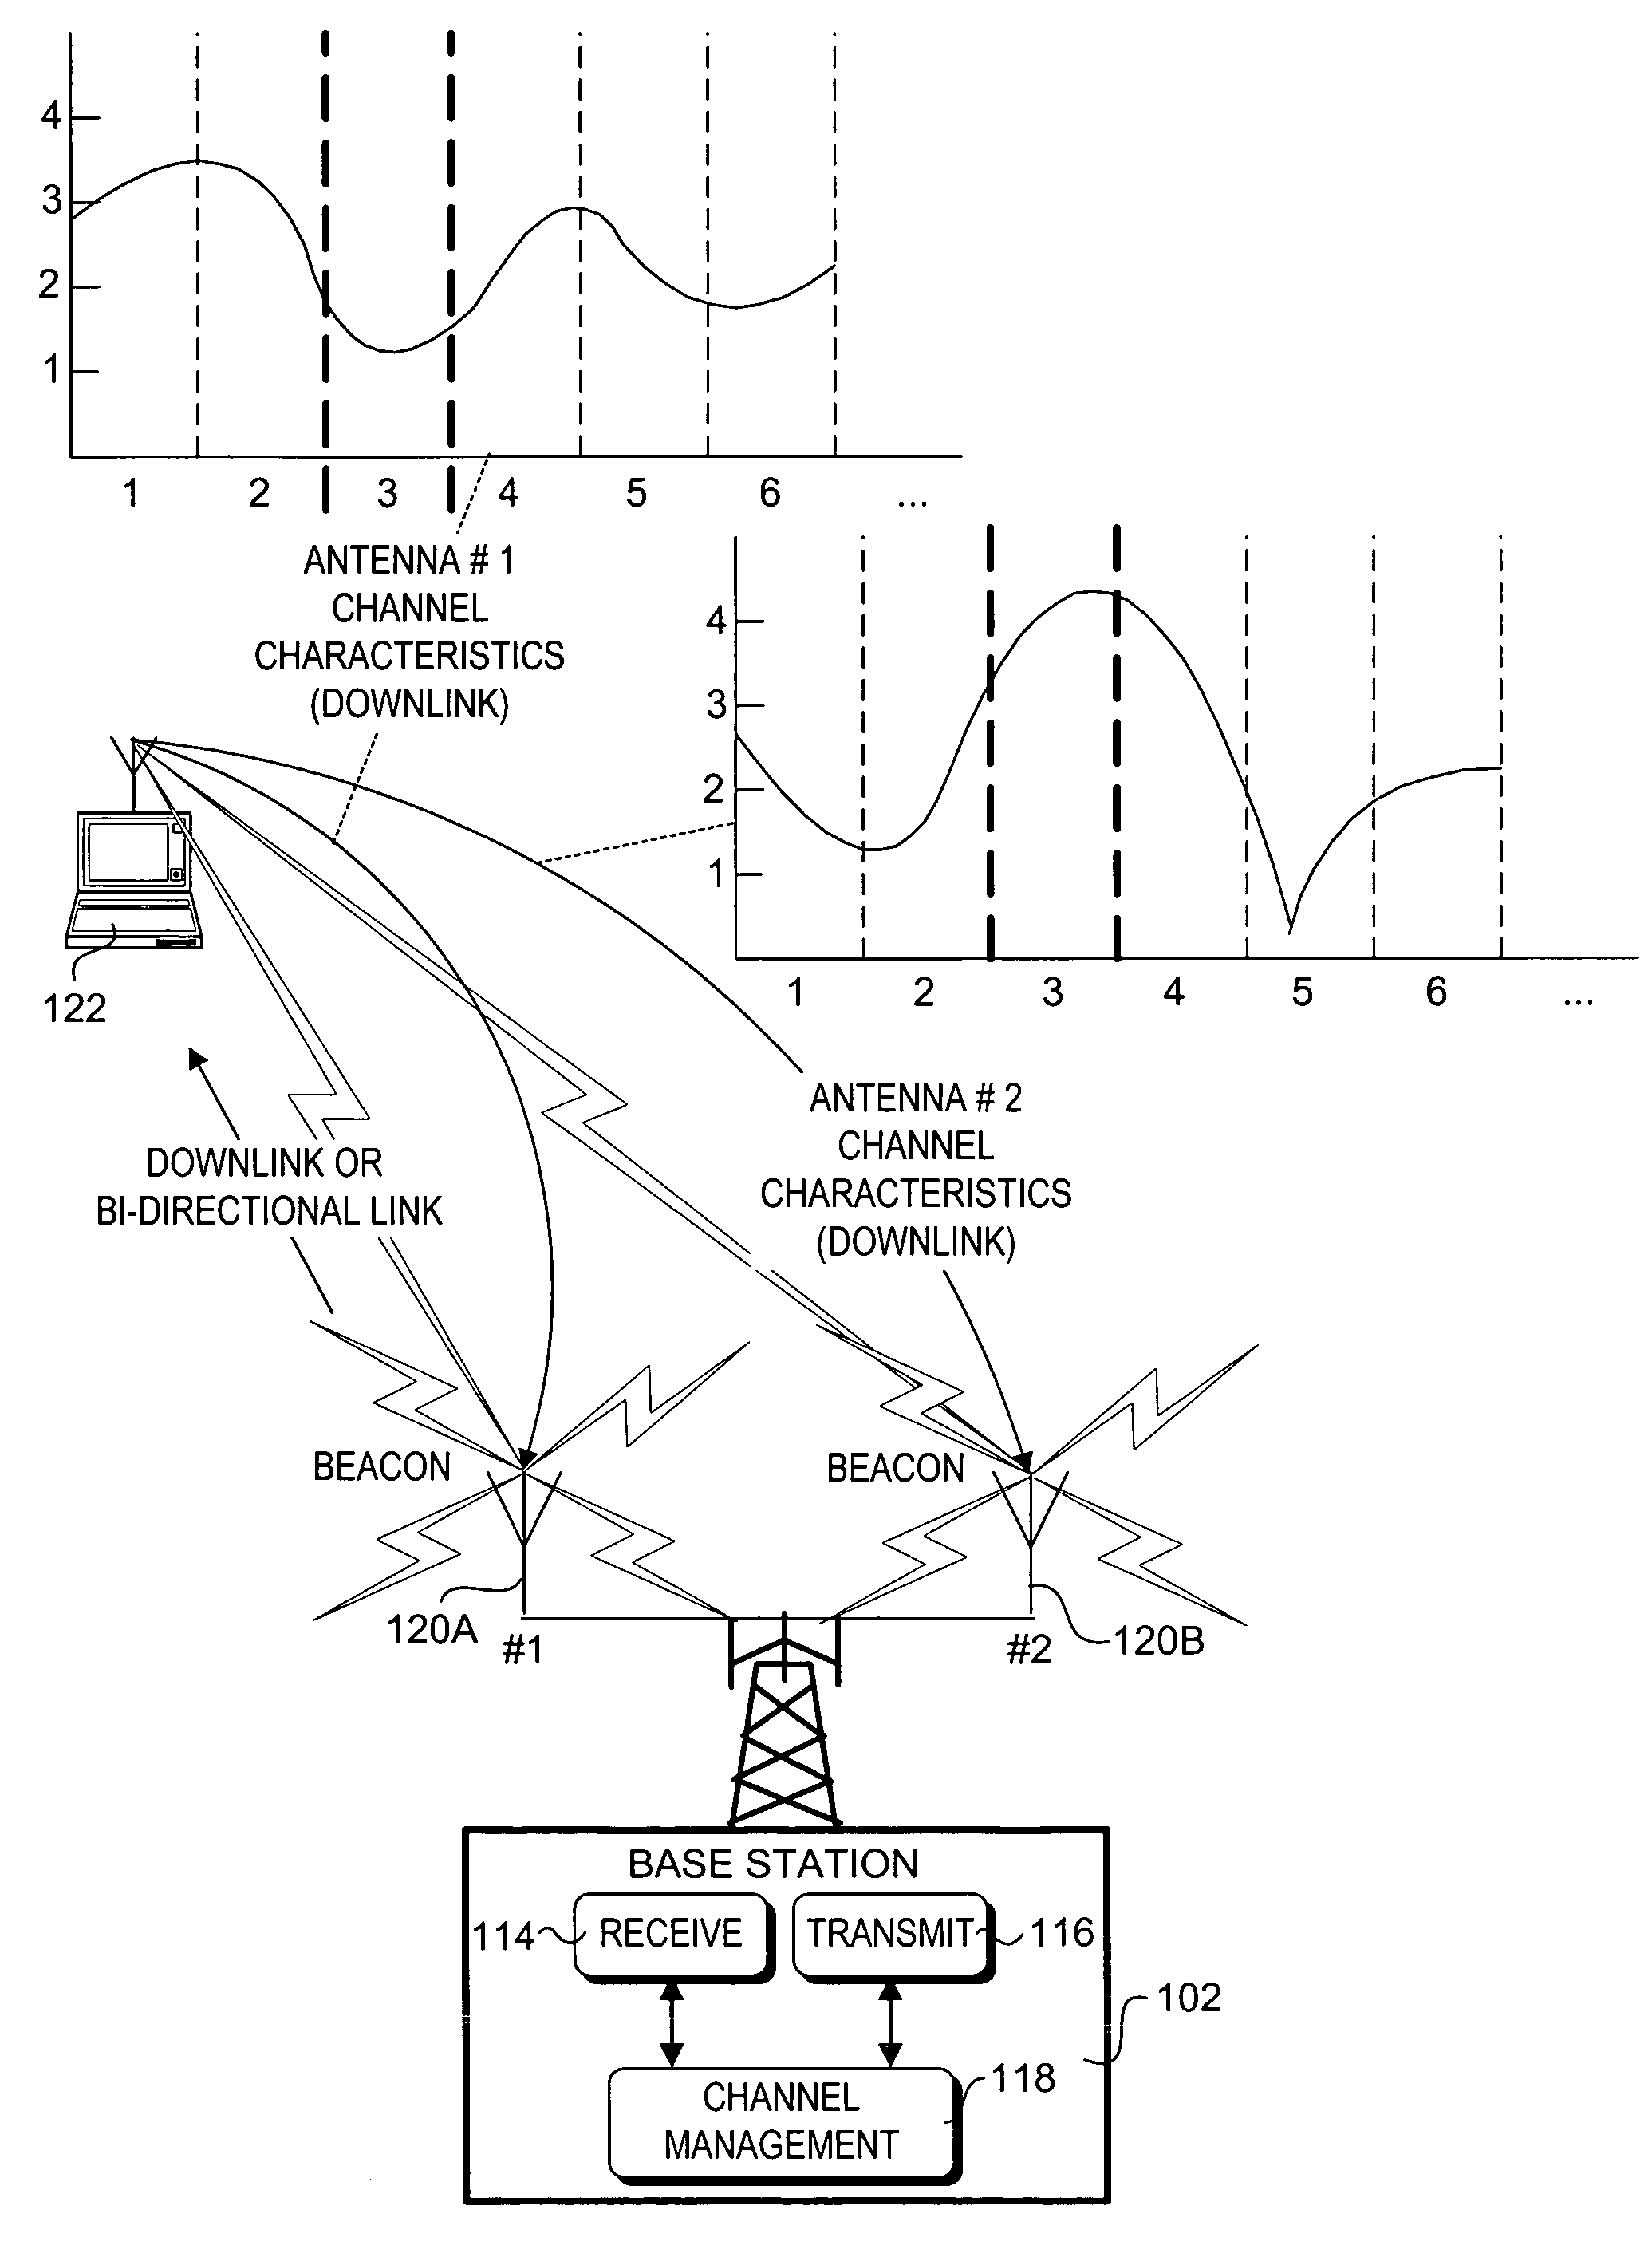 Method and system for switching antenna and channel assignments in broadband wireless networks